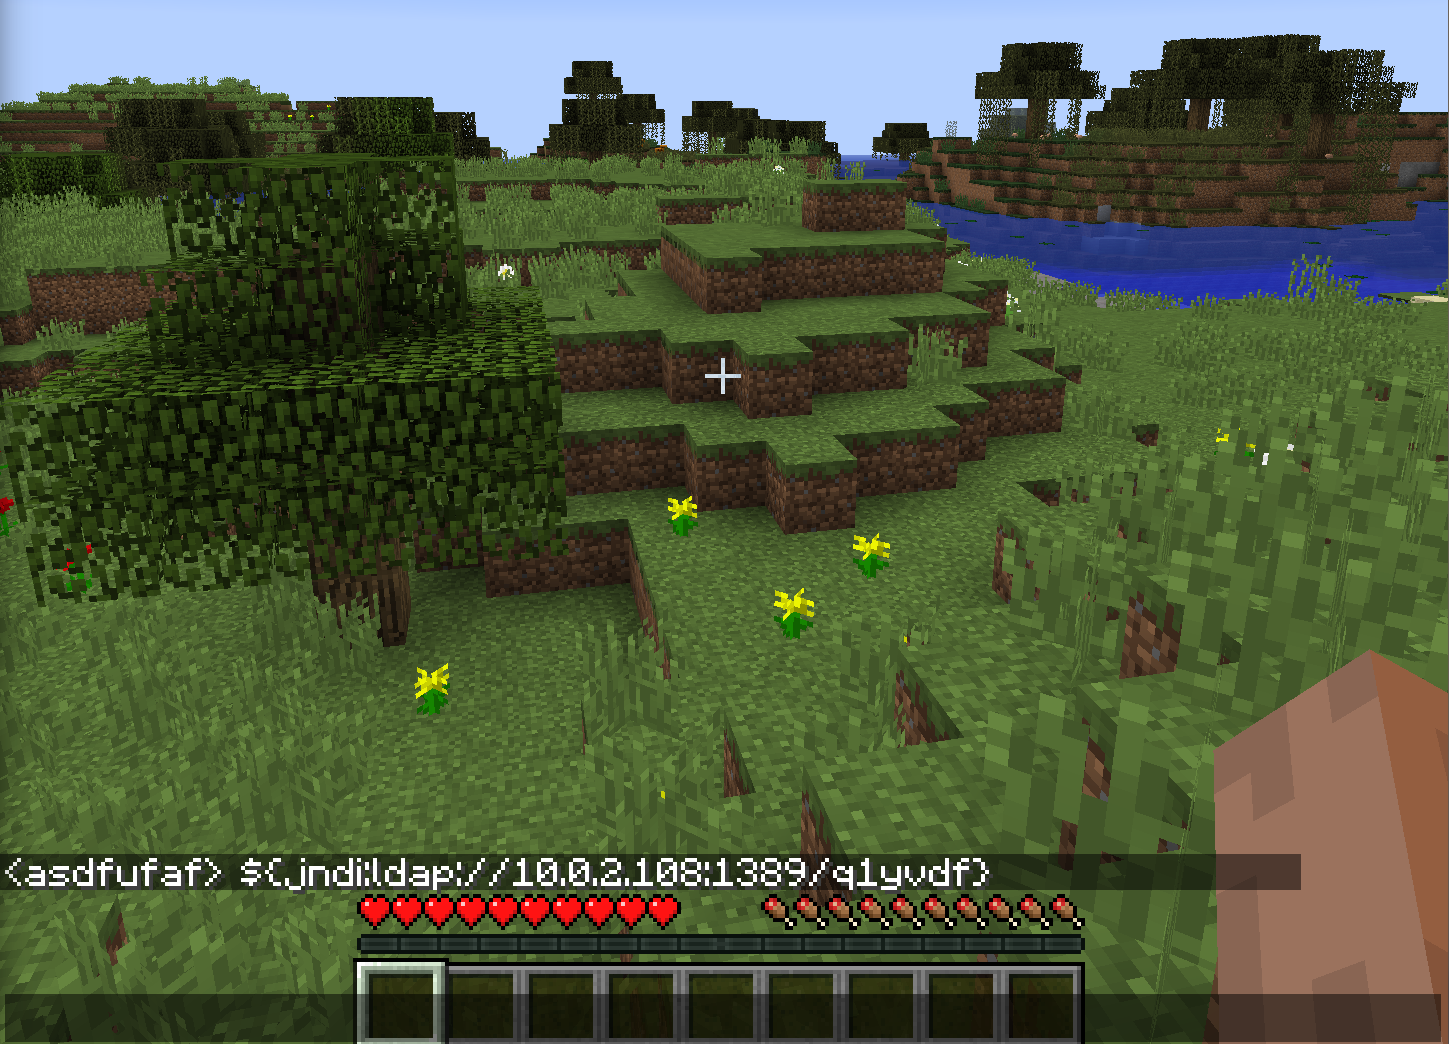 View of the Minecraft game and exploit code